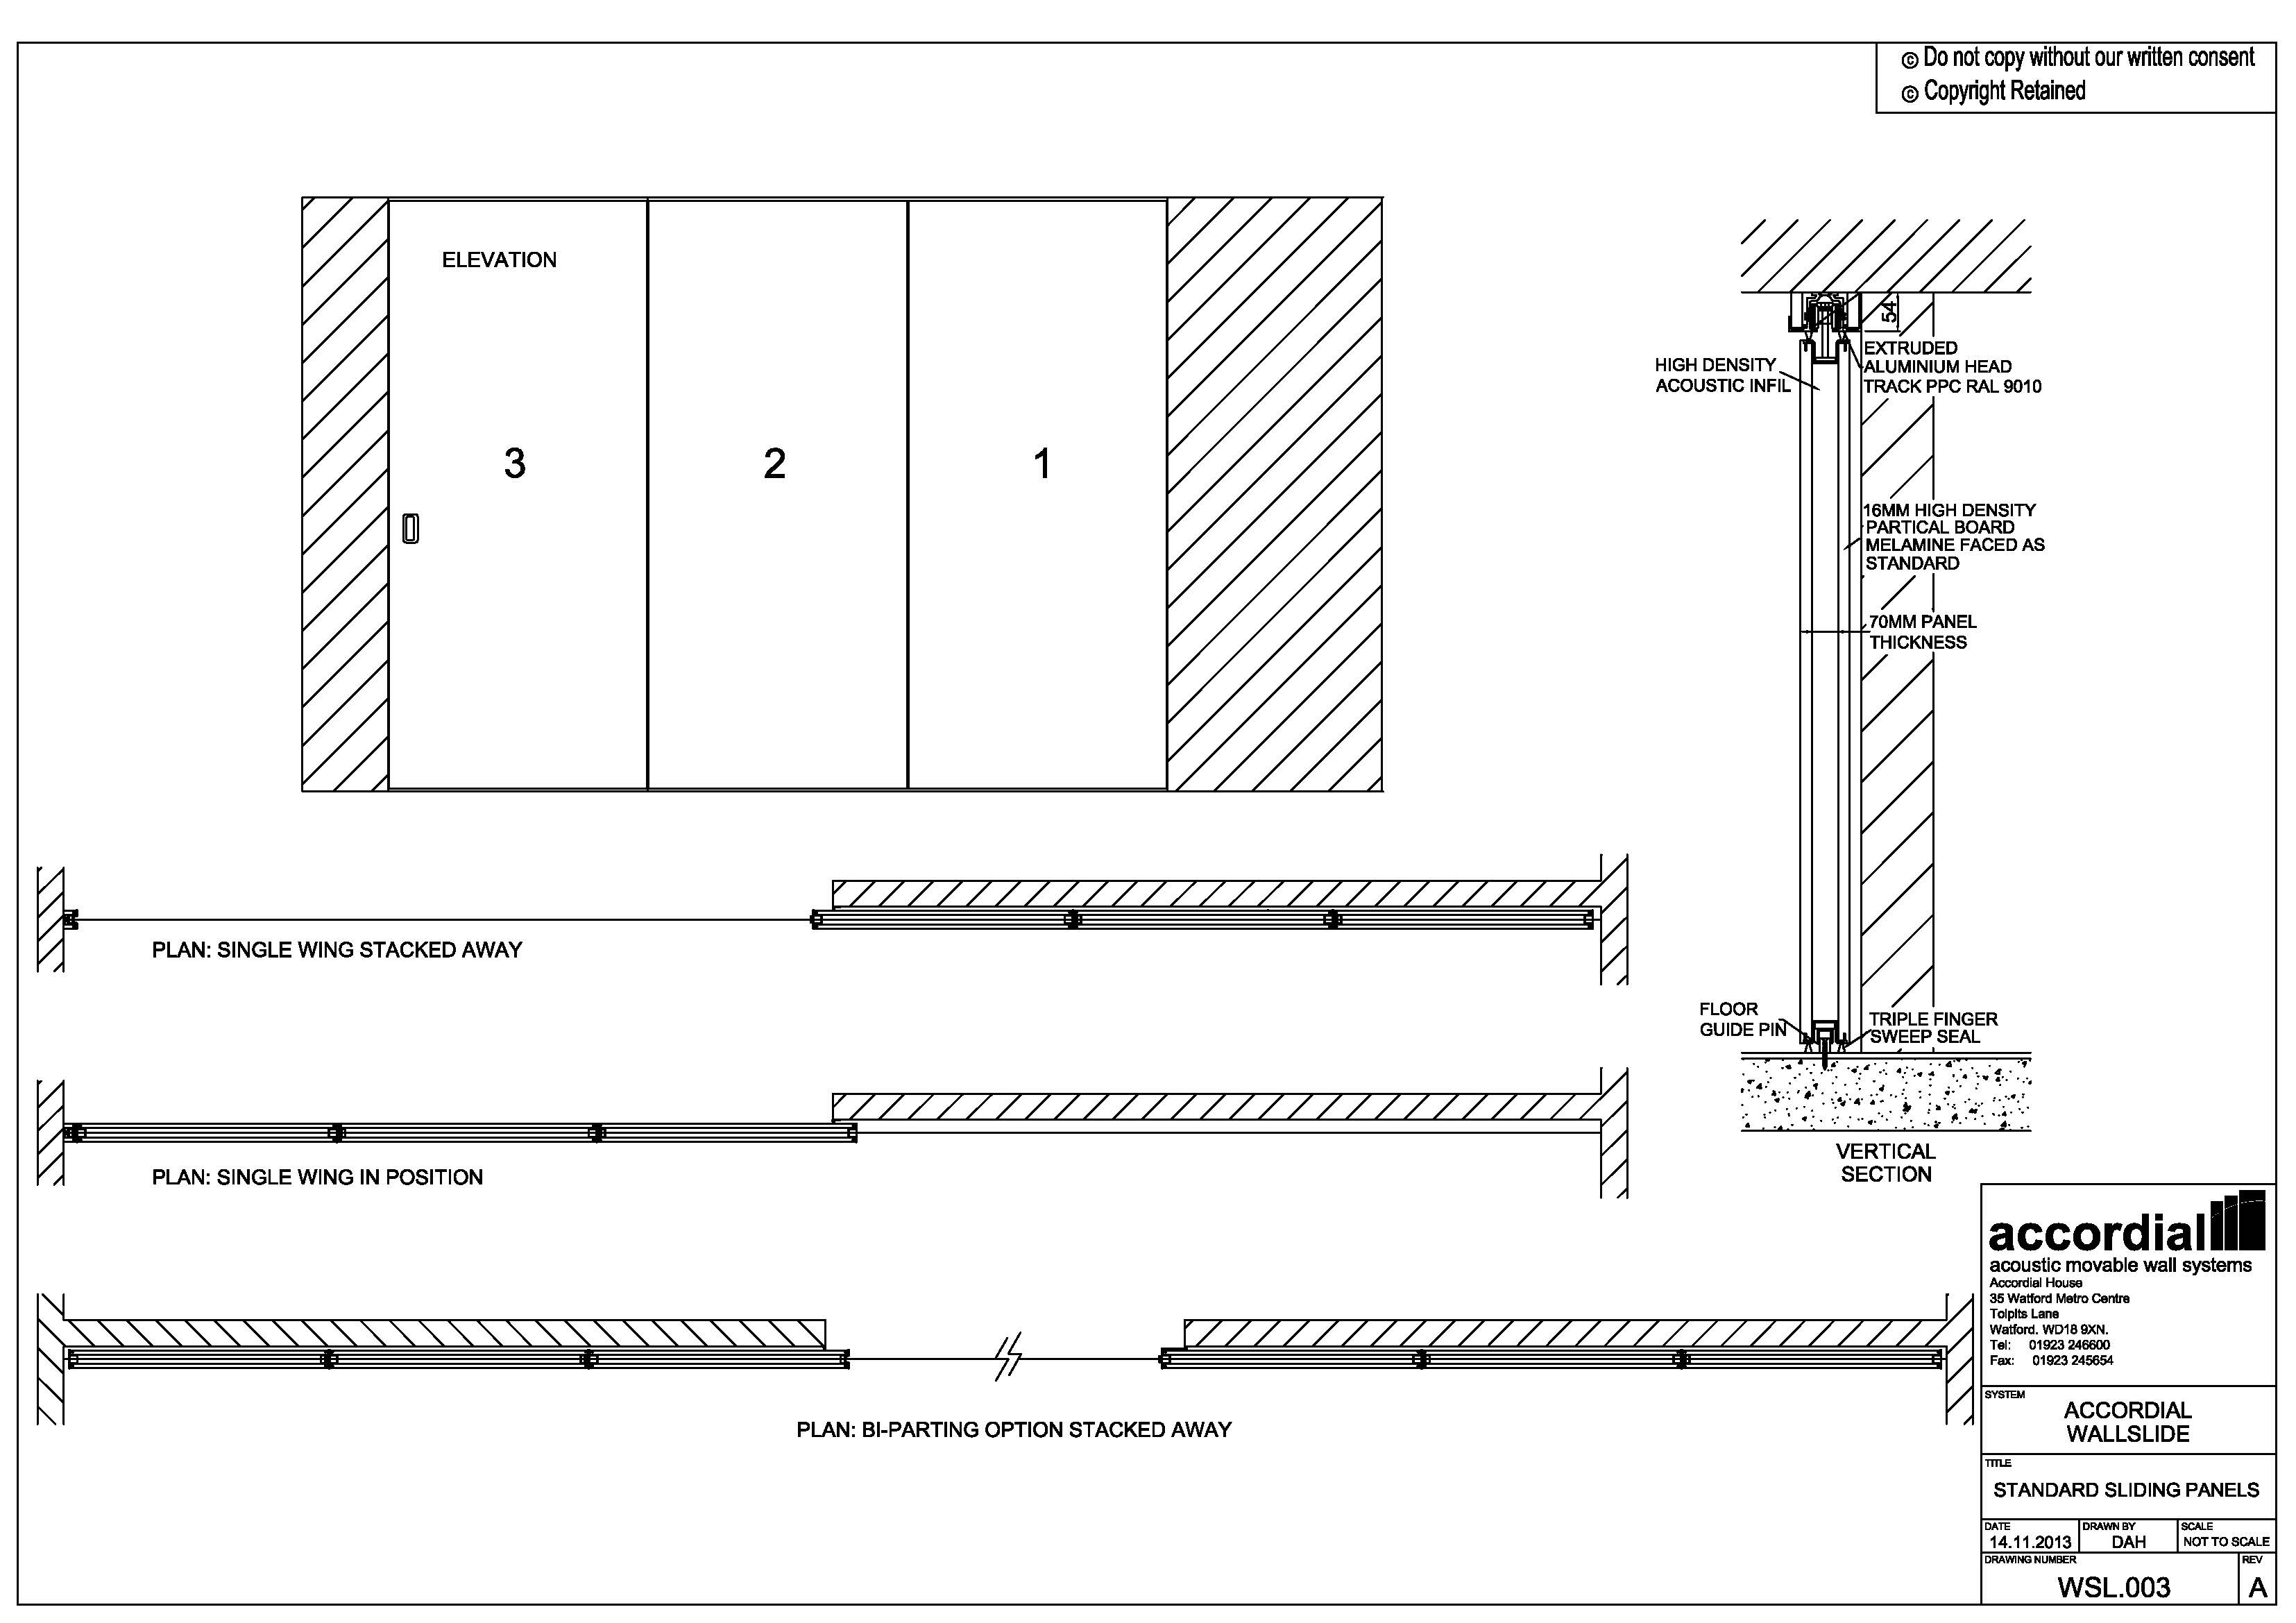 Sliding Door Elevation Drawing at PaintingValley.com | Explore